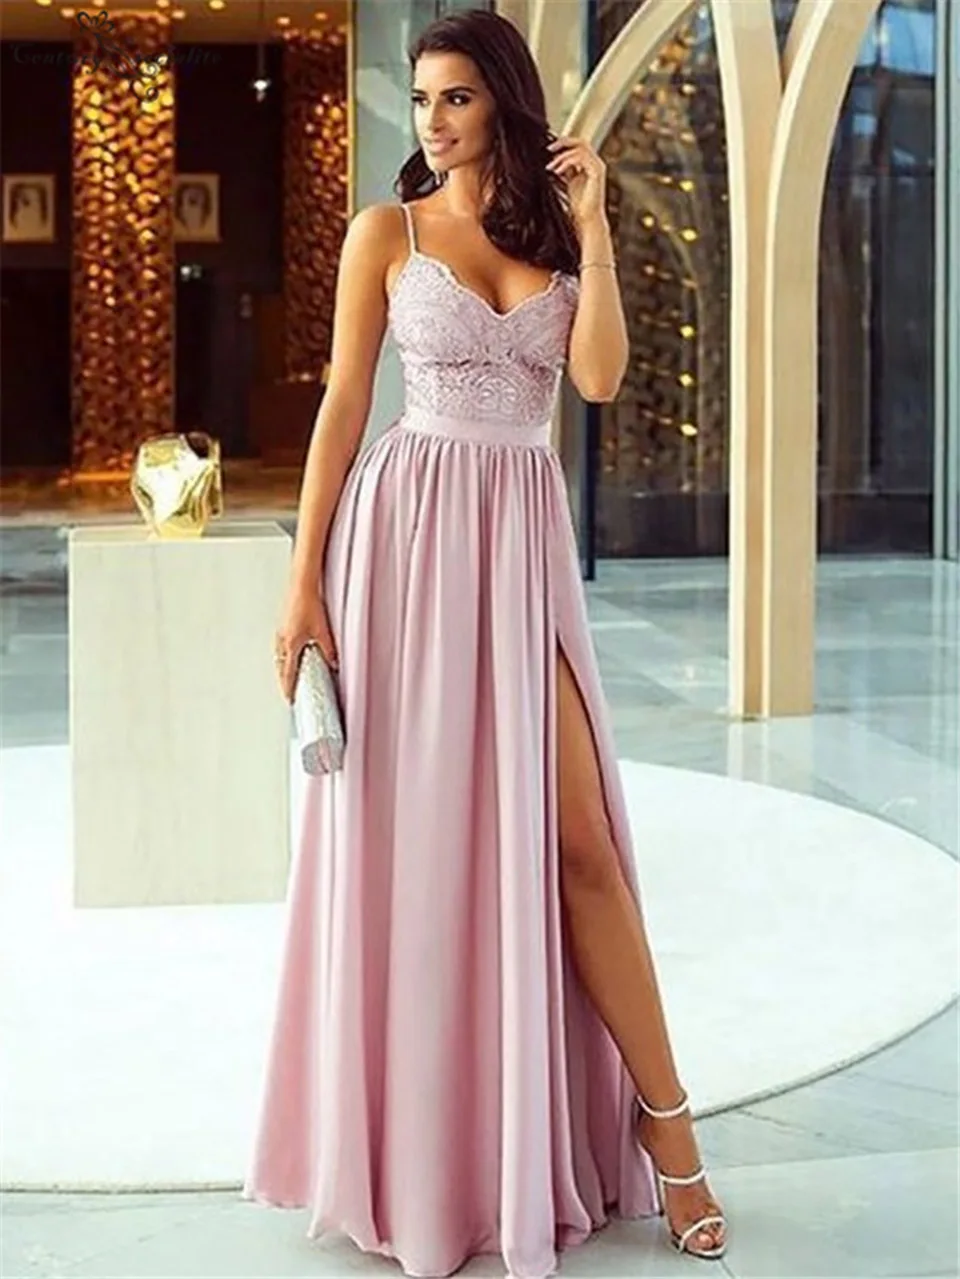 

A Line Applique Dress Elastic Satin Bridesmaid Dresses Gown Thigh-High Slits Sweetheart Prom Party Gown Sleeveless